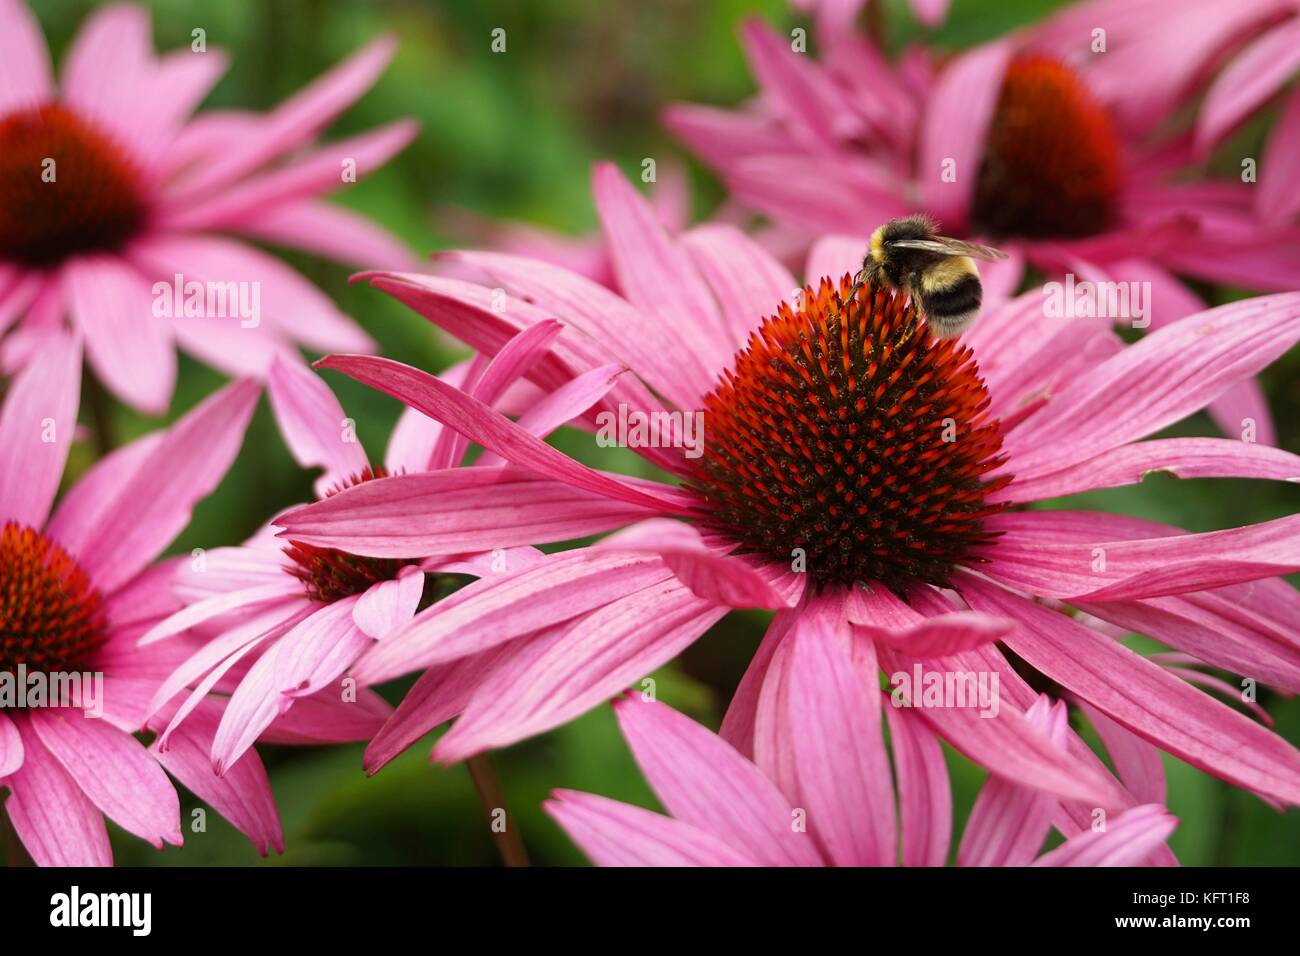 Bee on Flower Close Up - Echinacea flower purple/red petals Stock Photo